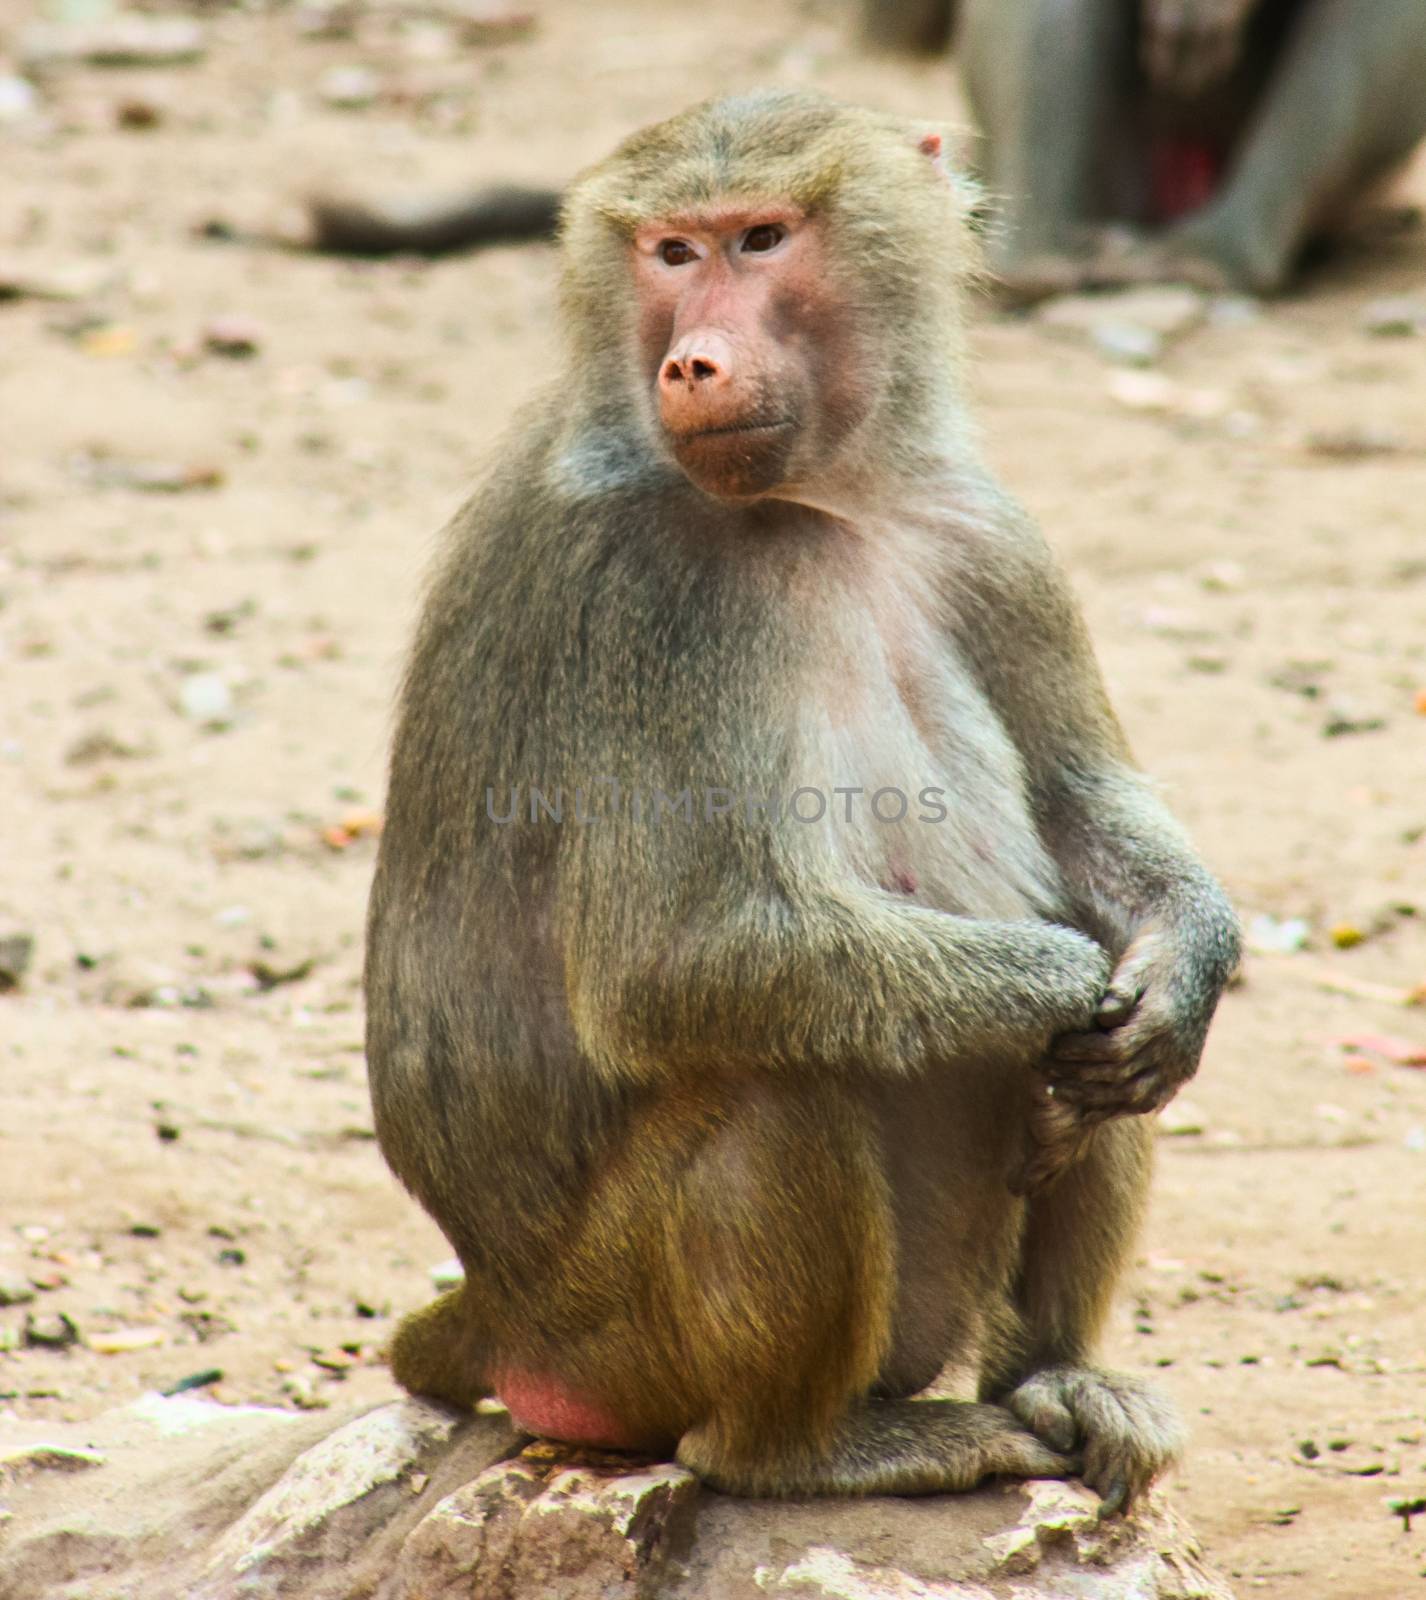 Baboon Monkey living, eating and playing in the Savanna standing on mountains and rocks